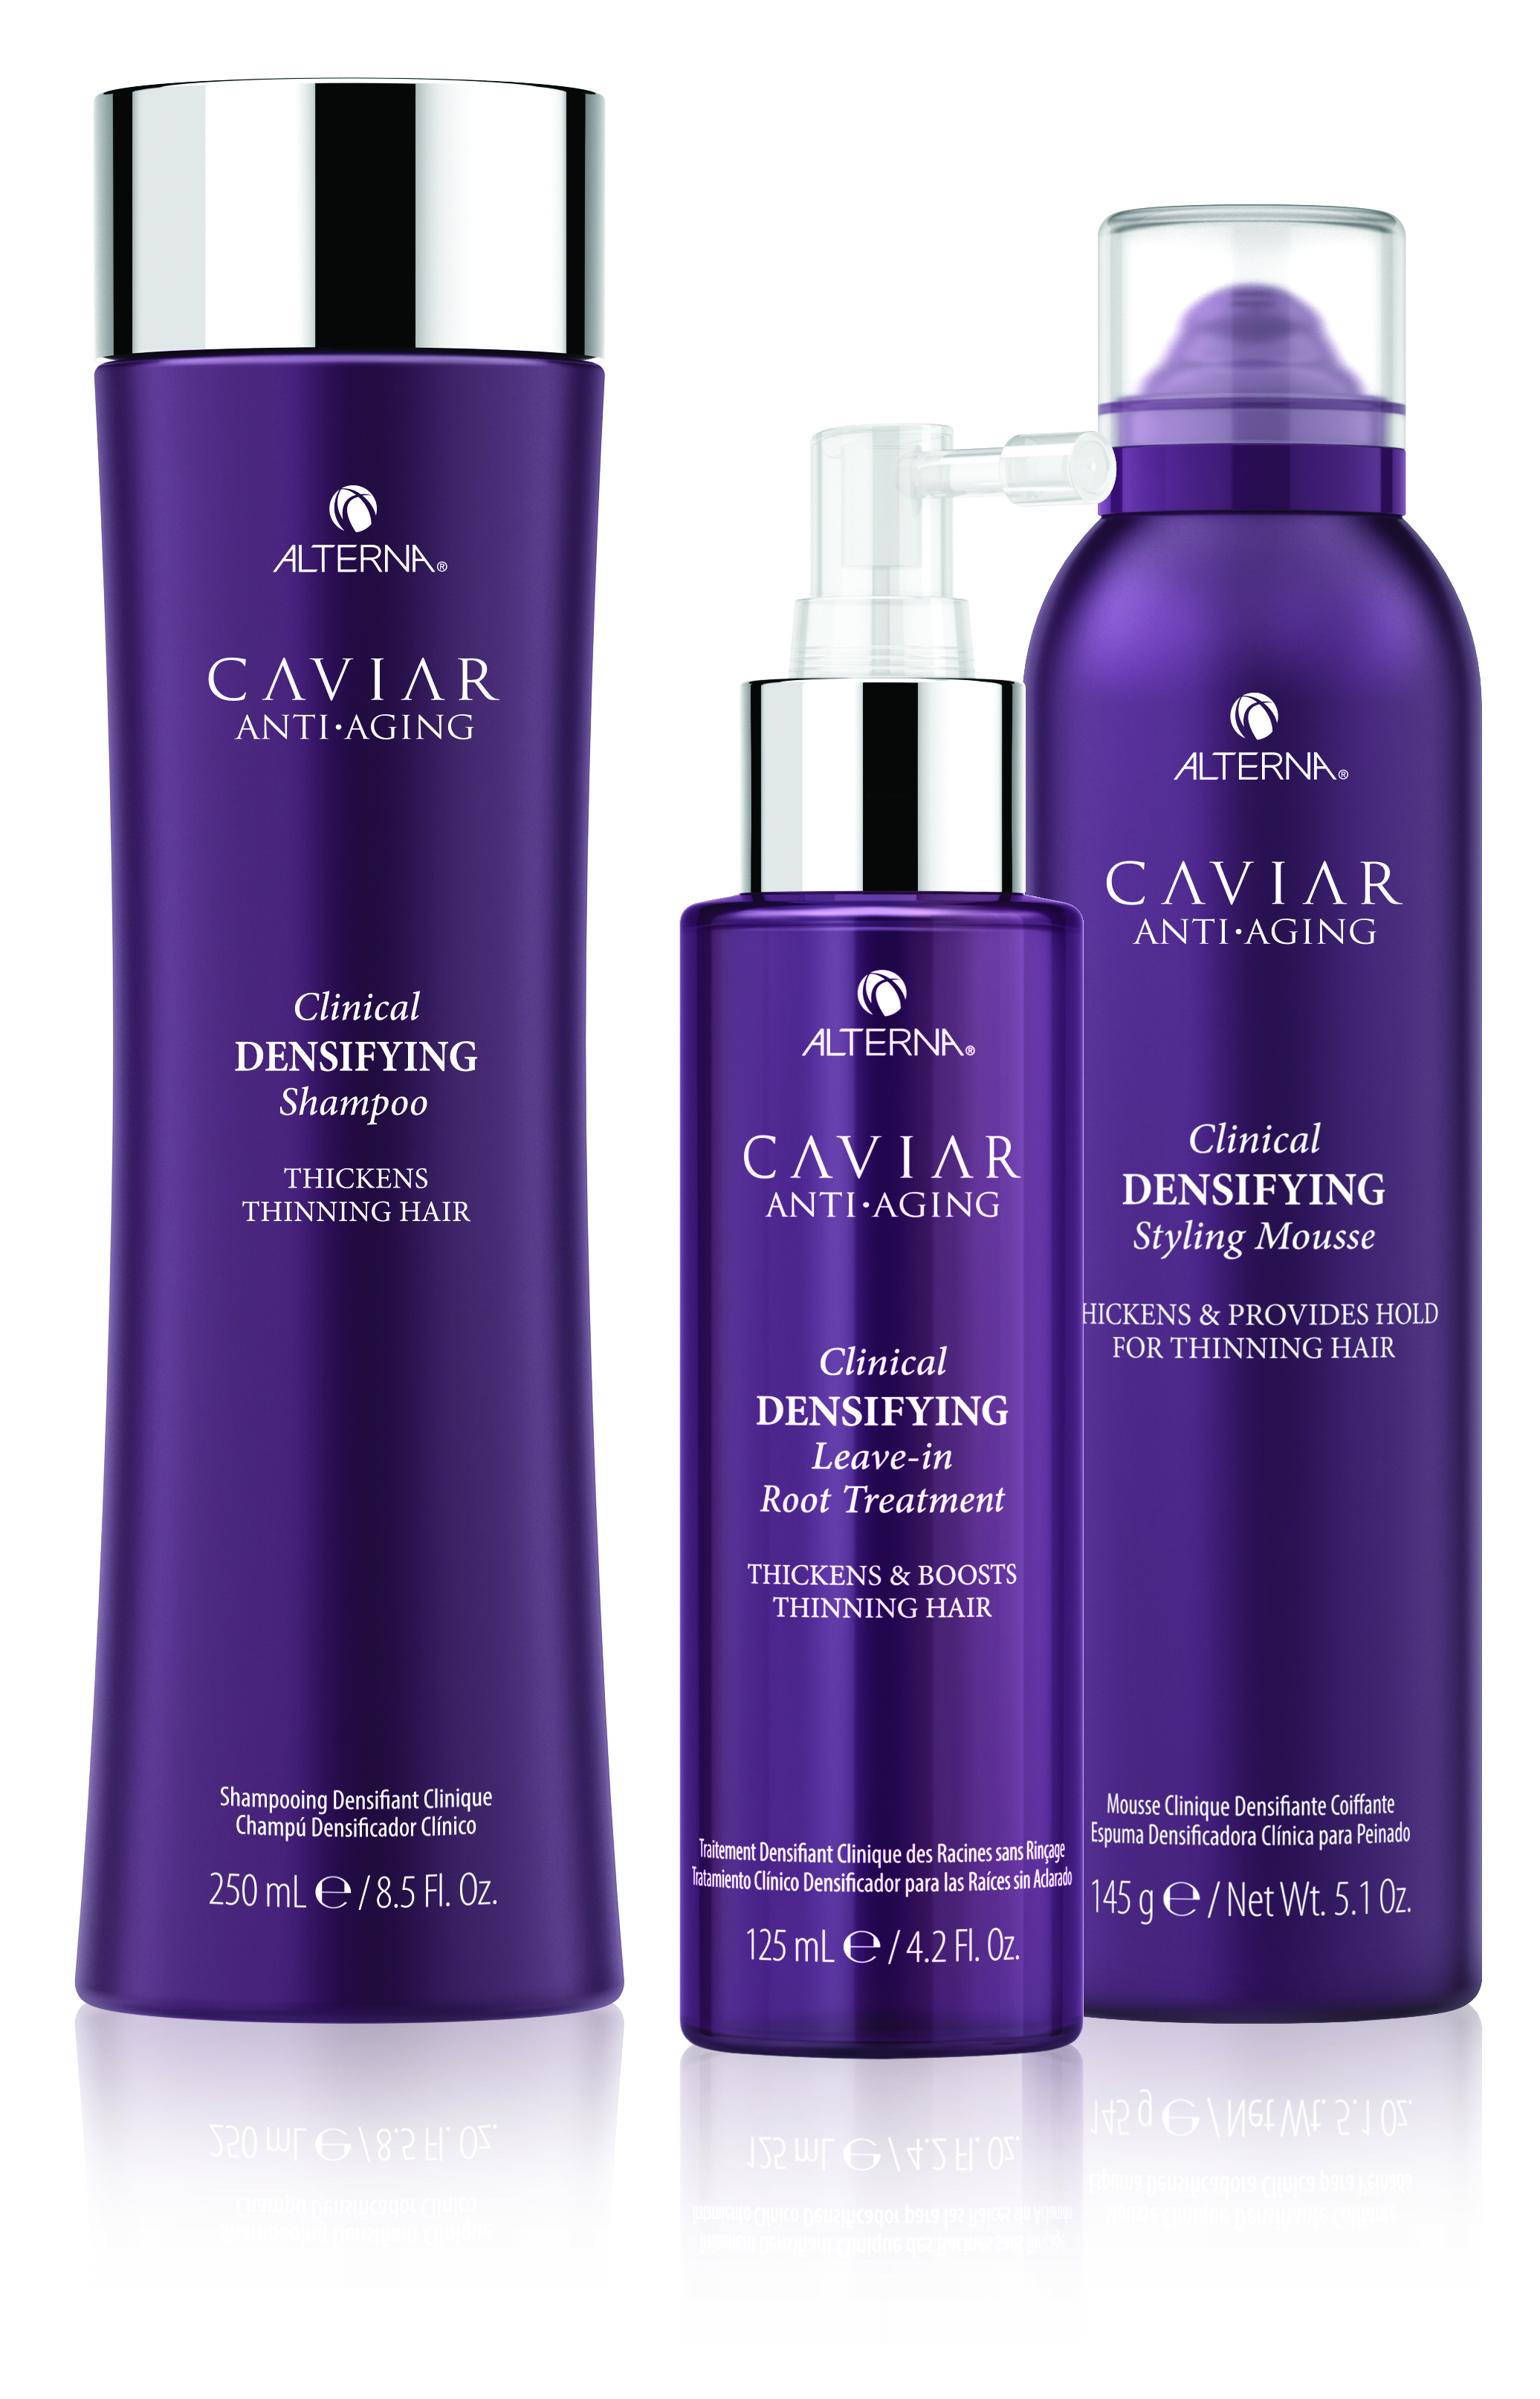 Alterna Caviar Anti-Aging Clinical Densifying collection 